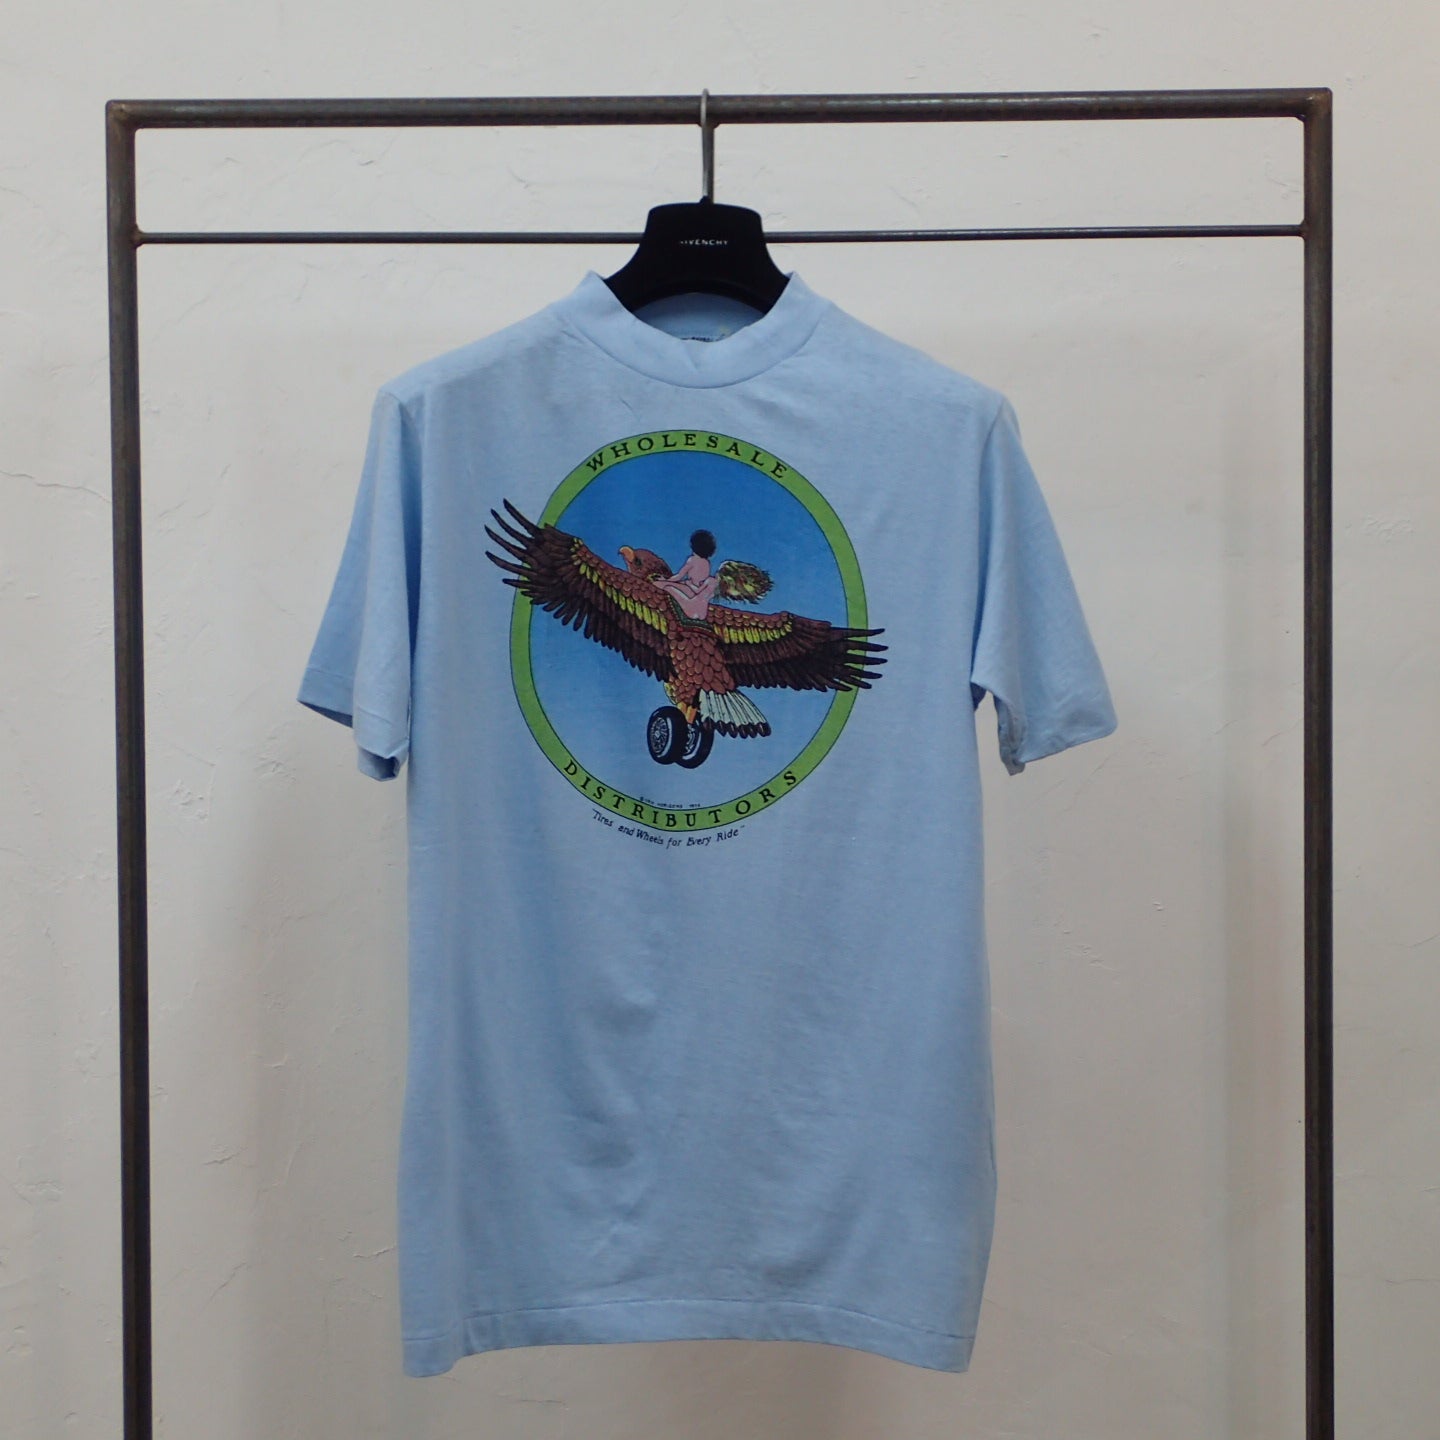 70s MONSTER CORPORATION T-shirt "Eagle and Wheels tee"